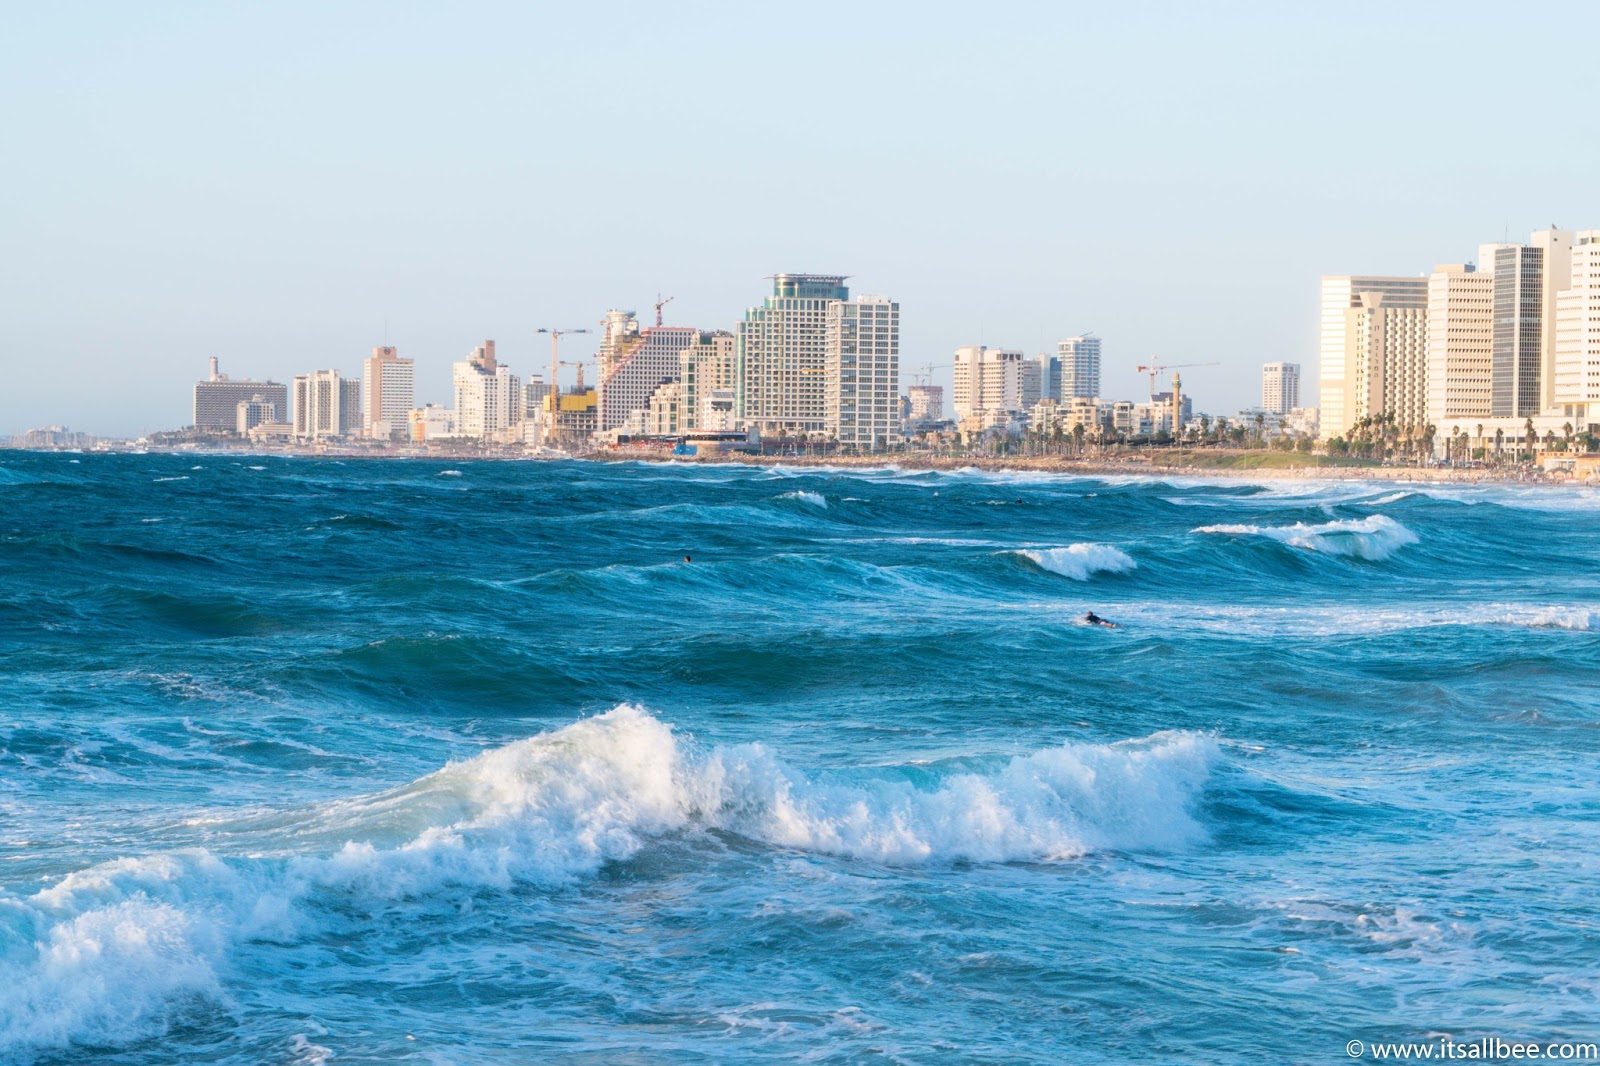 Jaffa - Things to do in Tel Aviv - Need inspiration on Mediterranean getaways? How about 10 cool reasons to visit Tel Aviv. Great food, stunning beaches, cool tourist sights and rich history. Nothing like your imagination. Read more on why you will fall in love with Tel Aviv at first sight! #beaches #holidays #vacation #sunshine #foodie #itsallbee